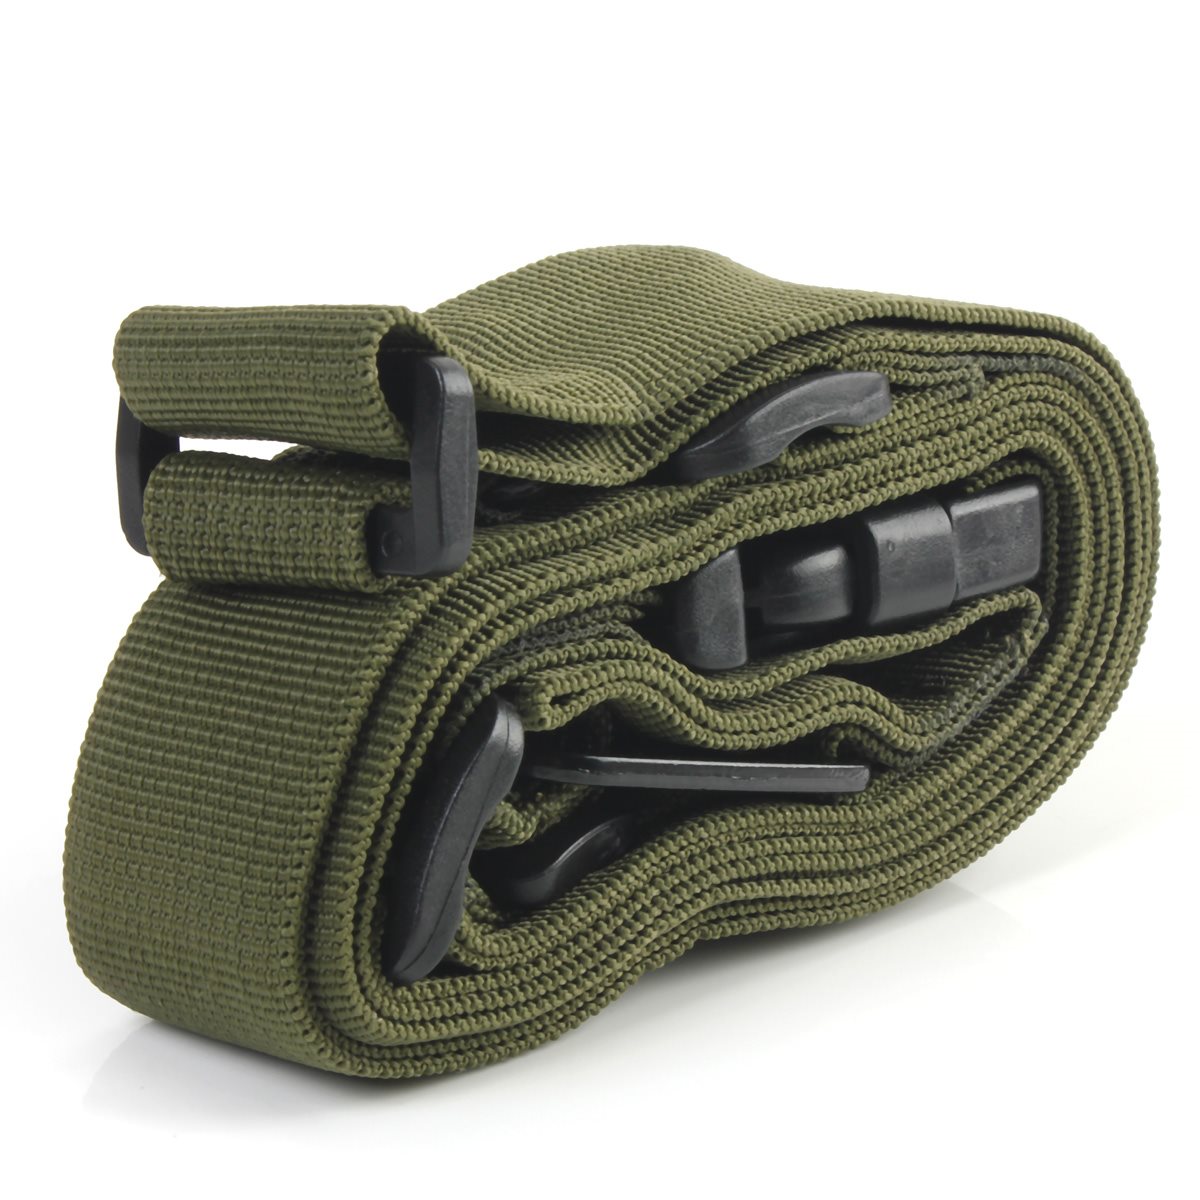 High quality Three Point Rifle Sling Adjustable Bungee Tactical Airsoft Gun Strap Paintball Gun Sling for